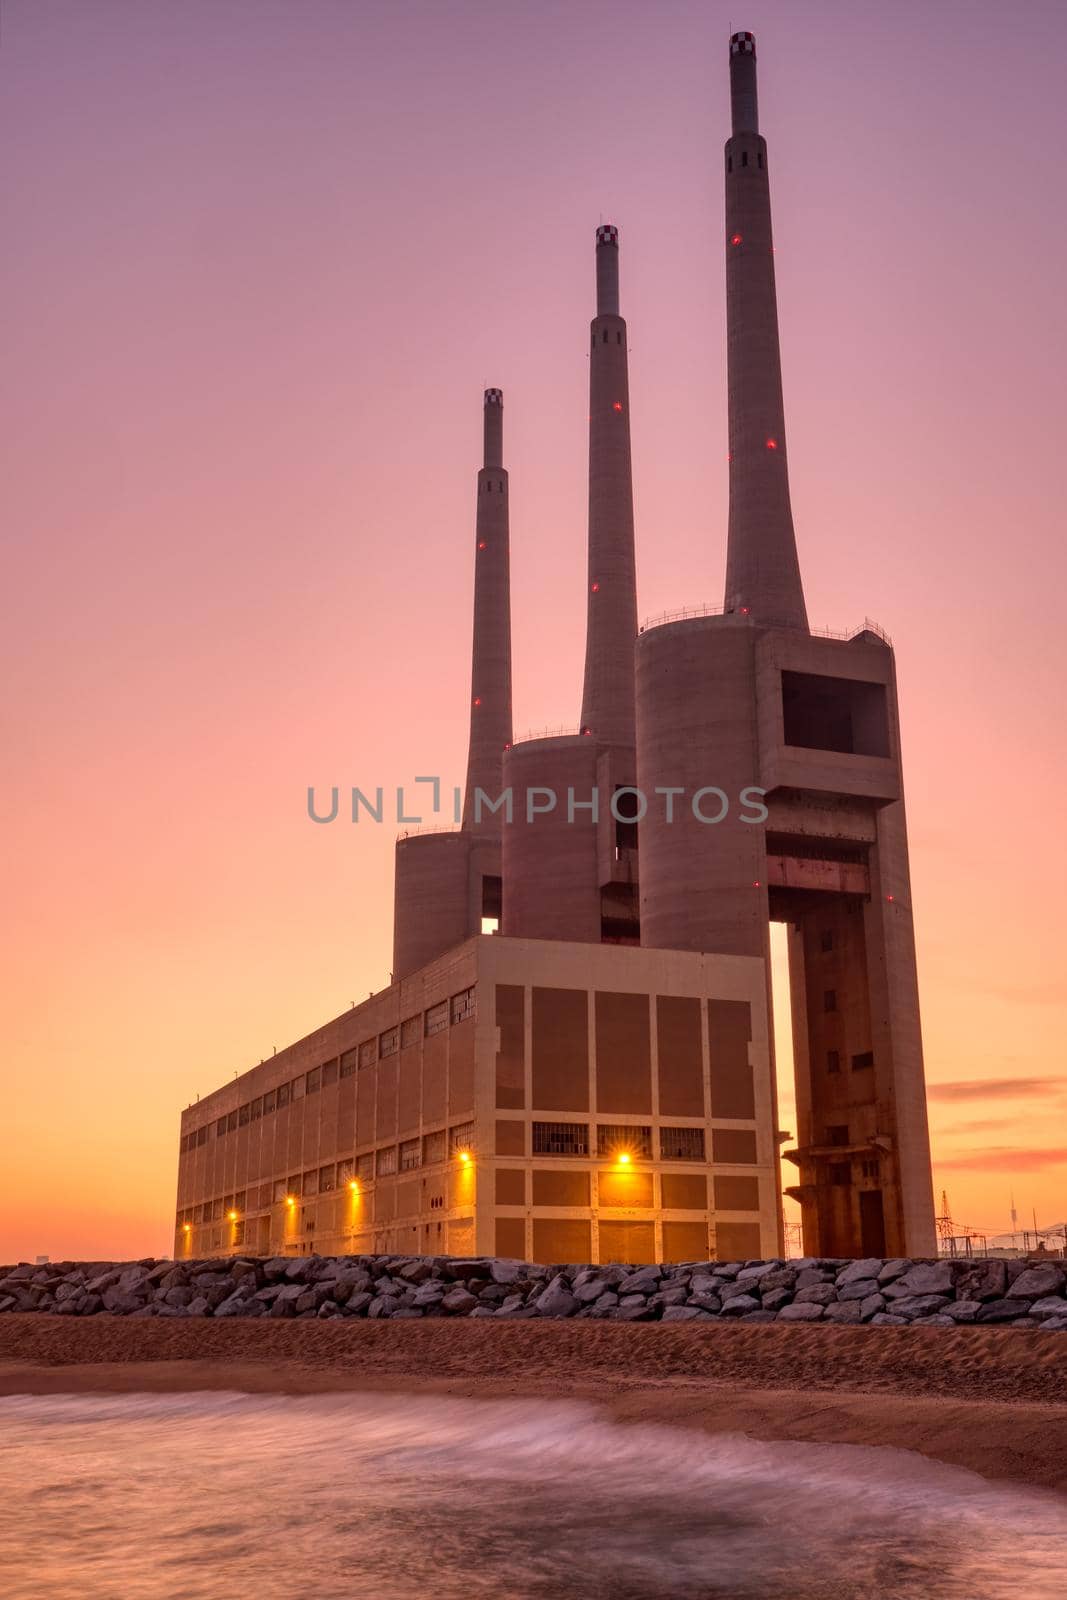 The disused thermal power station at Sand Adria near Barcelona at sunset